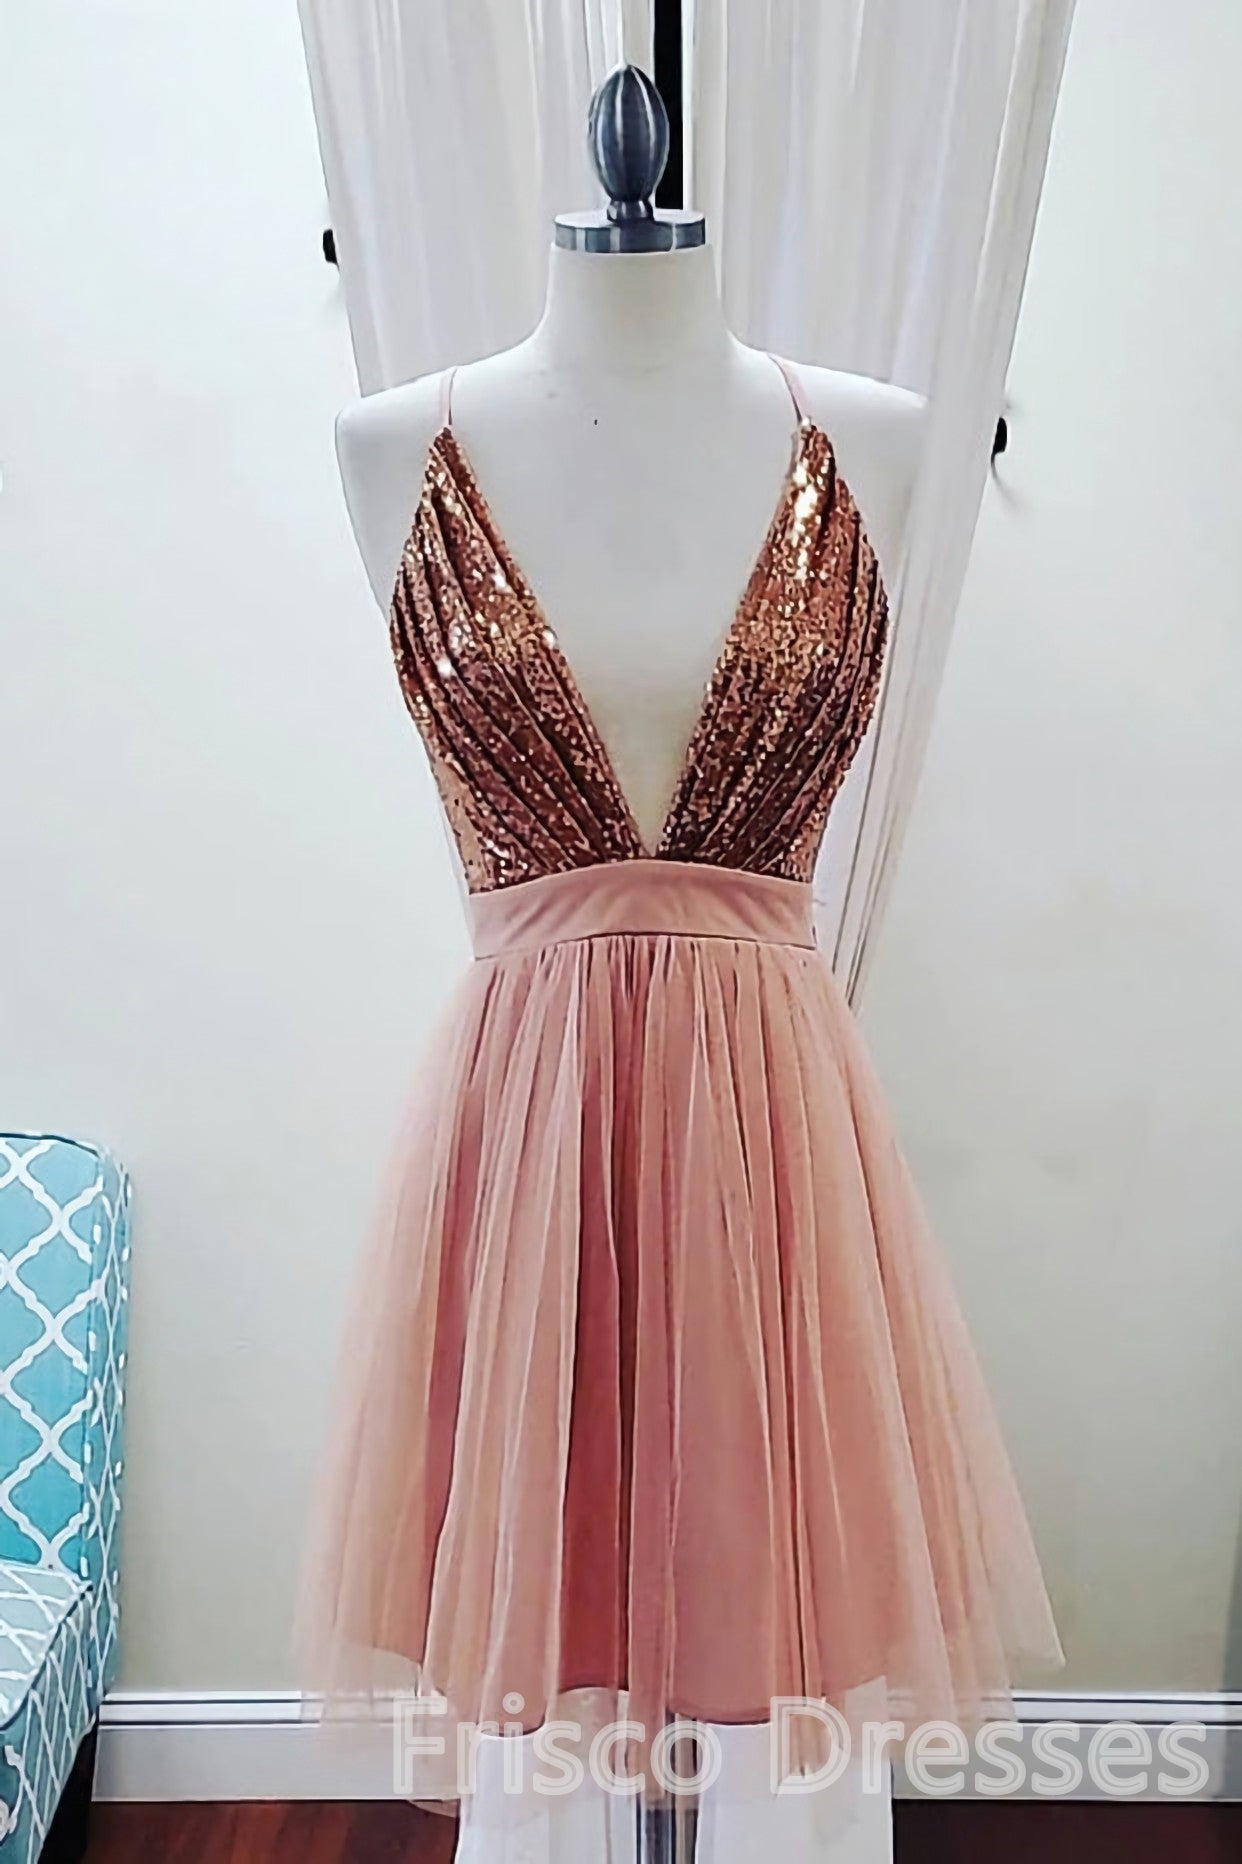 Deep V-neck Spaghetti Straps Sleeveless Sequins Short Corset Prom Dresses, Corset Homecoming Dresses outfit, Party Dress And Gown